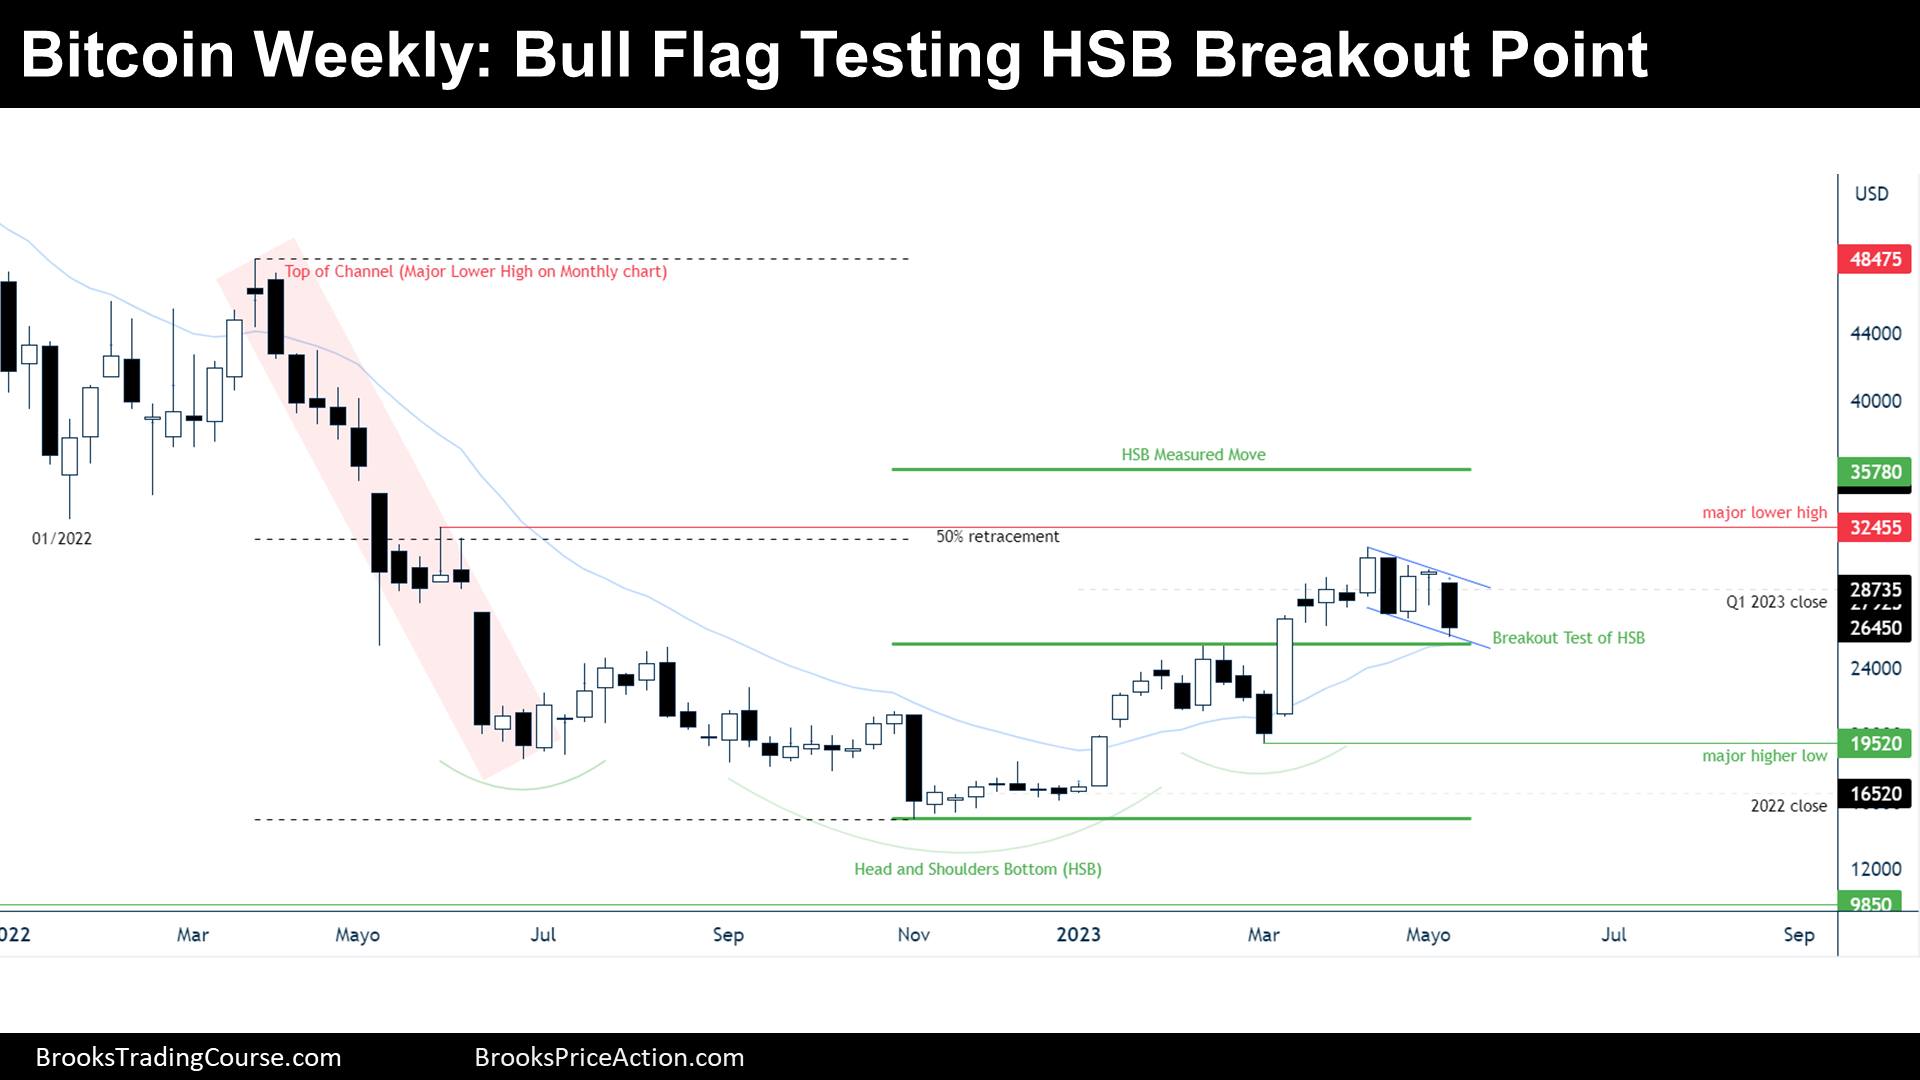 Bitcoin Weekly Bull Flag Test of Head and Shoulders Breakout Point